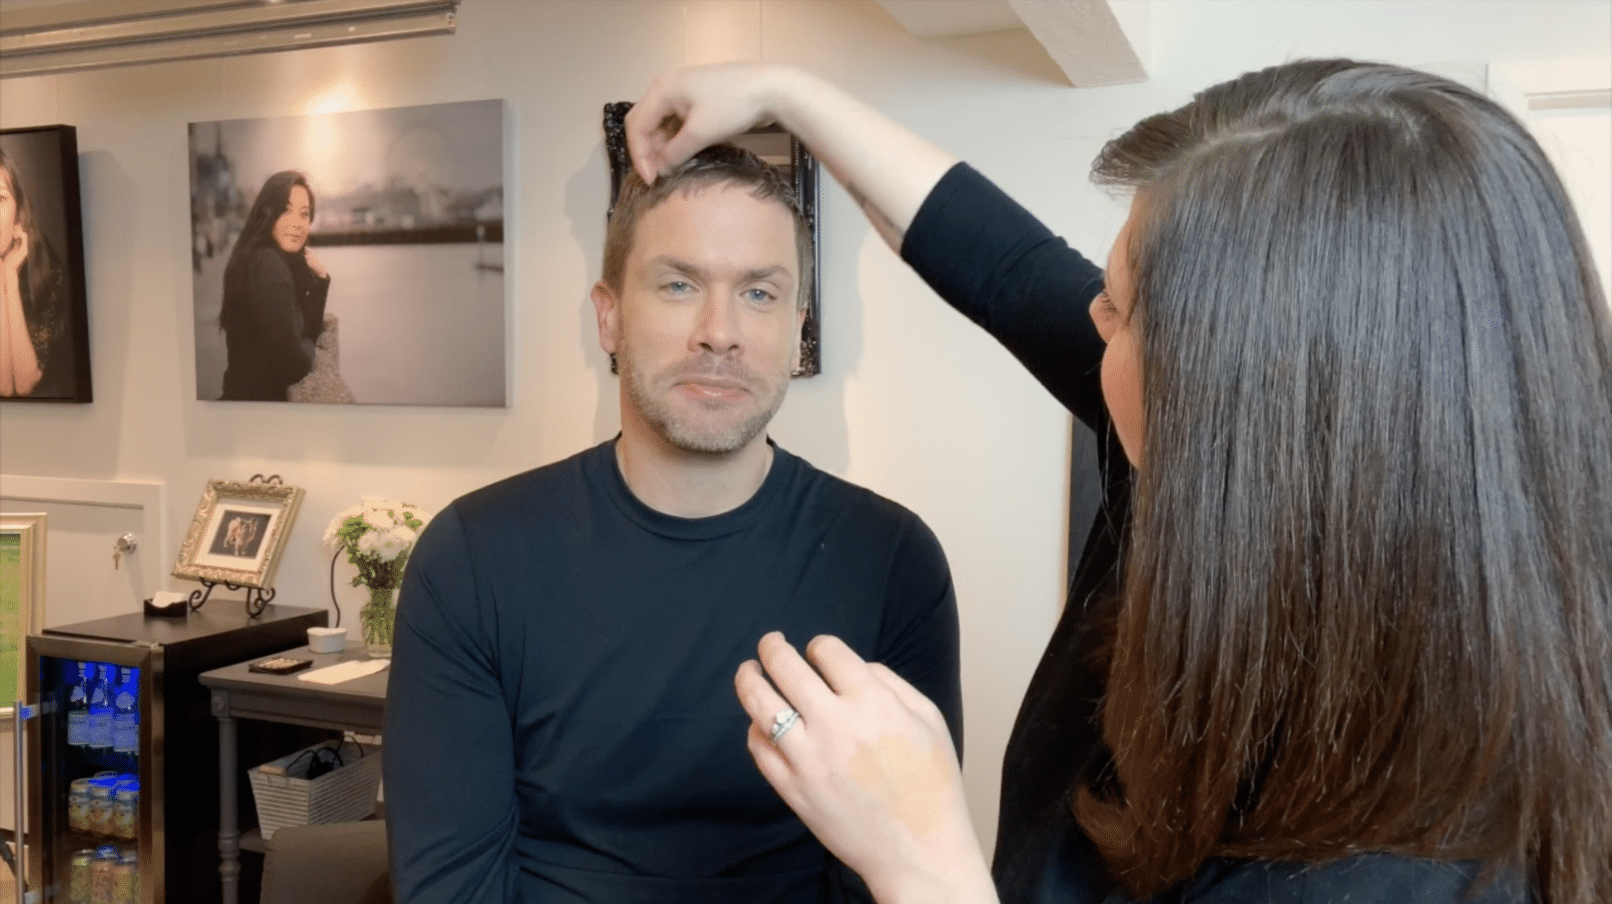 woman with brown hair doing make up for a man with short hair and black shirt